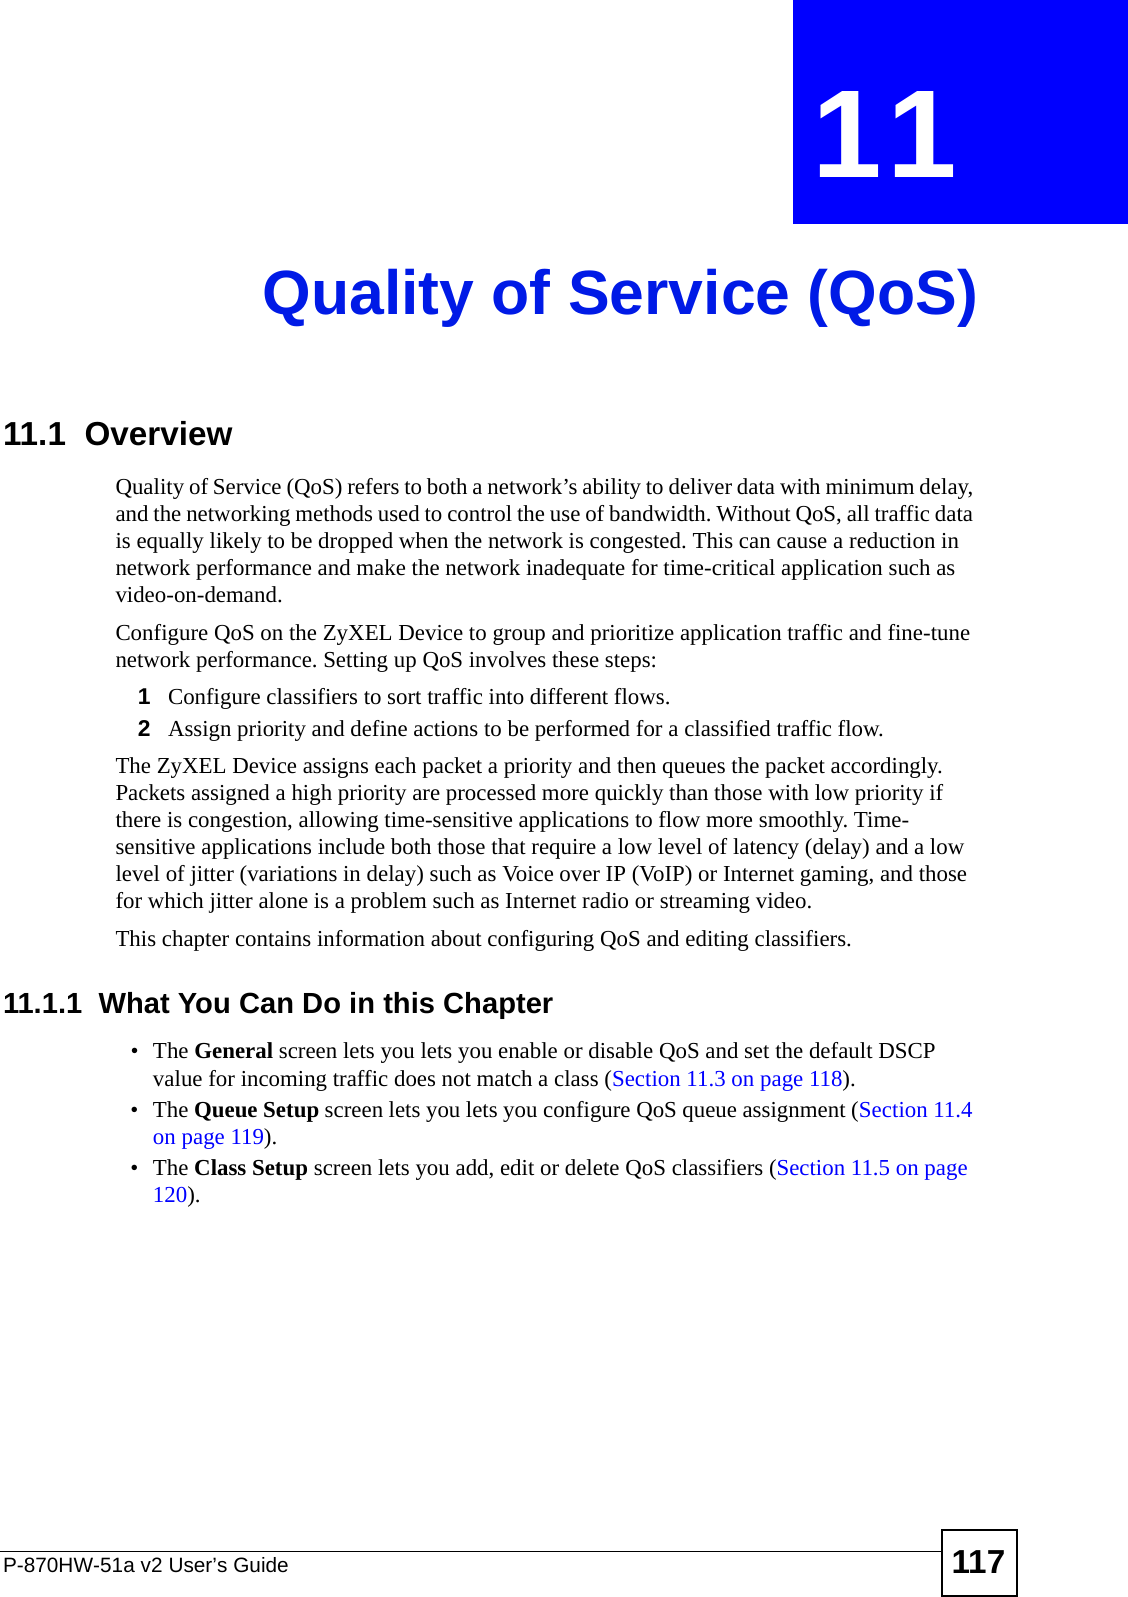 P-870HW-51a v2 User’s Guide 117CHAPTER  11 Quality of Service (QoS)11.1  Overview Quality of Service (QoS) refers to both a network’s ability to deliver data with minimum delay, and the networking methods used to control the use of bandwidth. Without QoS, all traffic data is equally likely to be dropped when the network is congested. This can cause a reduction in network performance and make the network inadequate for time-critical application such as video-on-demand.Configure QoS on the ZyXEL Device to group and prioritize application traffic and fine-tune network performance. Setting up QoS involves these steps:1Configure classifiers to sort traffic into different flows. 2Assign priority and define actions to be performed for a classified traffic flow. The ZyXEL Device assigns each packet a priority and then queues the packet accordingly. Packets assigned a high priority are processed more quickly than those with low priority if there is congestion, allowing time-sensitive applications to flow more smoothly. Time-sensitive applications include both those that require a low level of latency (delay) and a low level of jitter (variations in delay) such as Voice over IP (VoIP) or Internet gaming, and those for which jitter alone is a problem such as Internet radio or streaming video.This chapter contains information about configuring QoS and editing classifiers.11.1.1  What You Can Do in this Chapter•The General screen lets you lets you enable or disable QoS and set the default DSCP value for incoming traffic does not match a class (Section 11.3 on page 118).•The Queue Setup screen lets you lets you configure QoS queue assignment (Section 11.4 on page 119).•The Class Setup screen lets you add, edit or delete QoS classifiers (Section 11.5 on page 120).